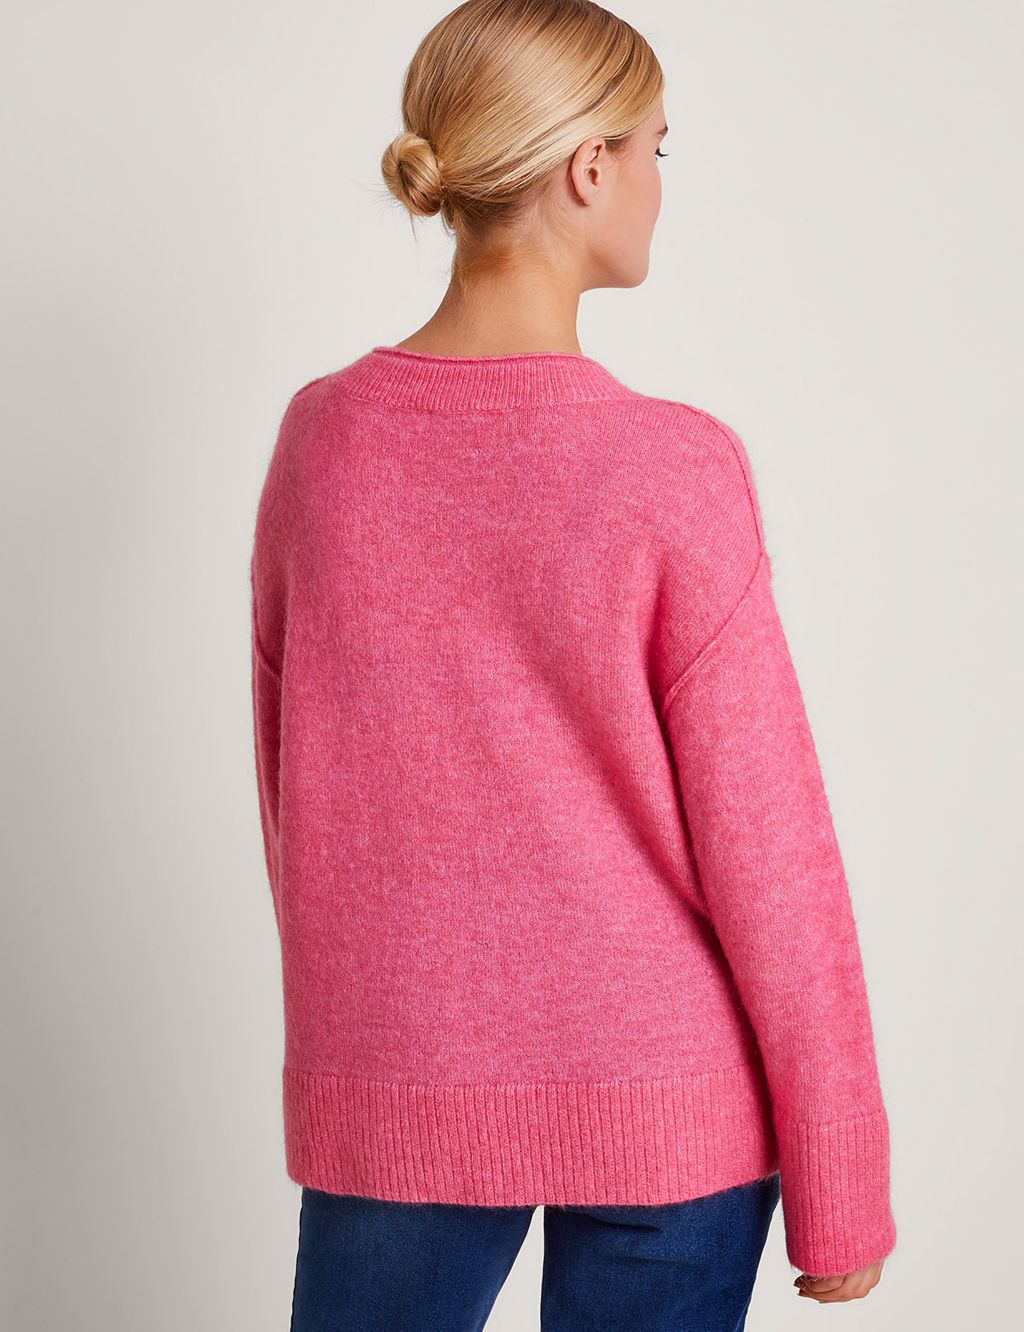 Crew Neck Jumper with Wool image 4